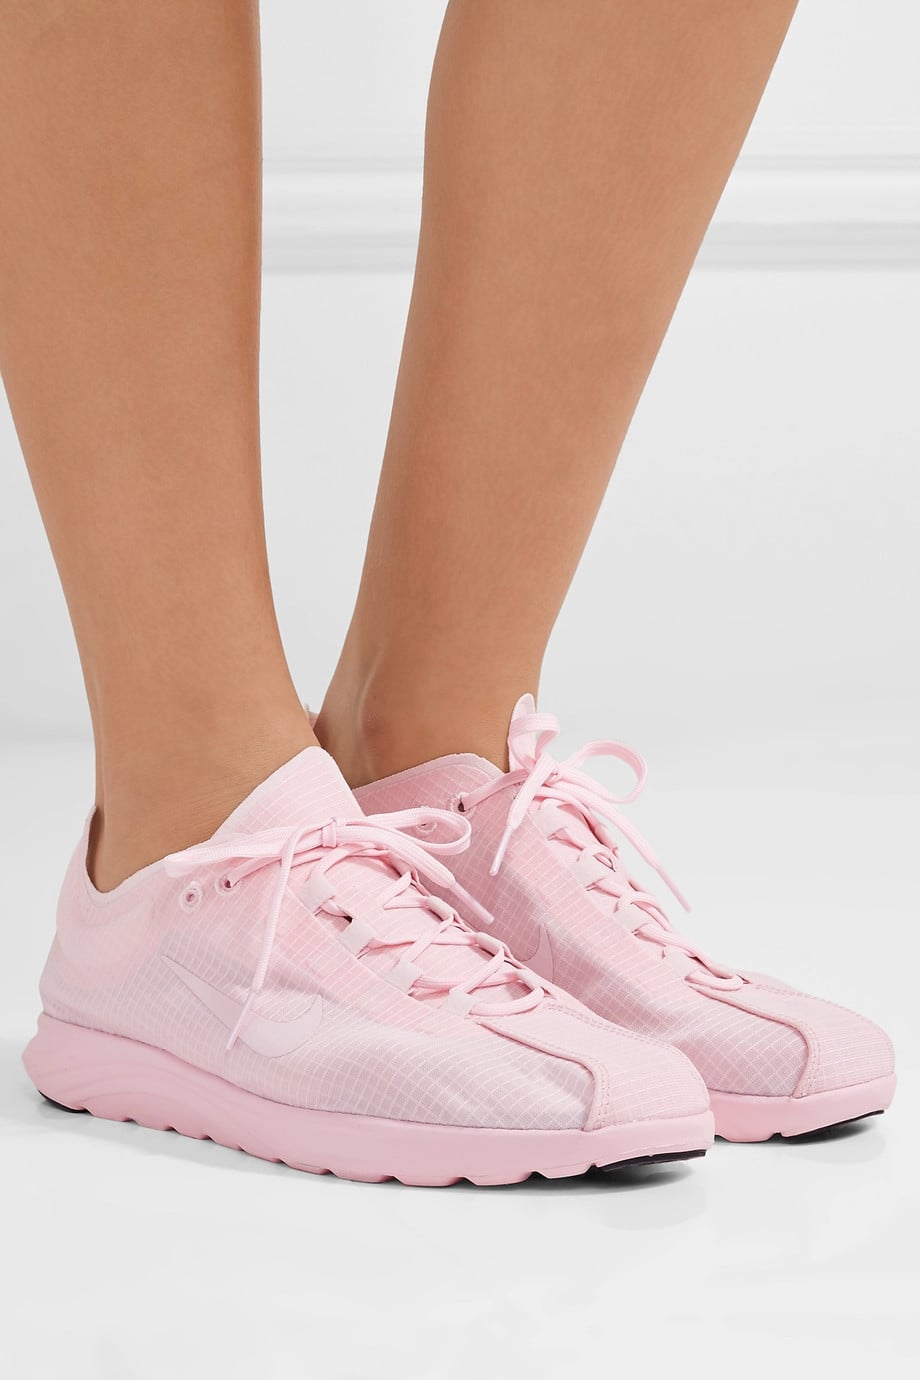 Nike Mayfly Lite Sneakers ($110) are to the touch | Everyone's Going Crazy For These Trendy Pink Sneakers | POPSUGAR Fashion Photo 10